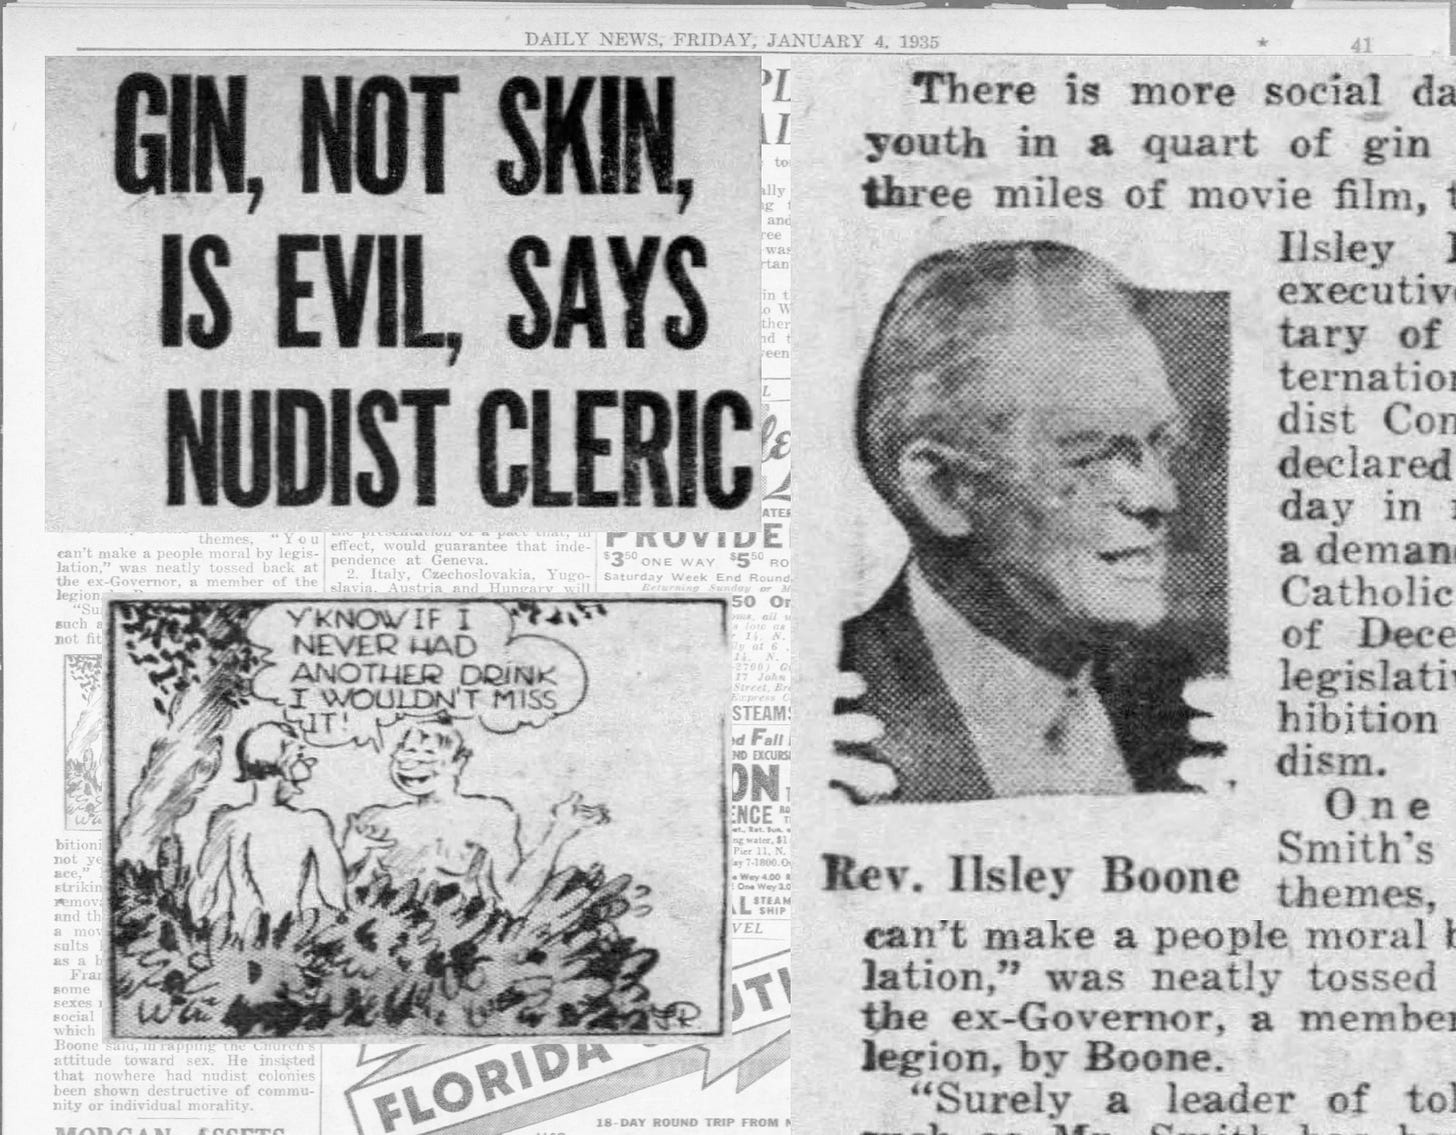 "Gin, not skin, is evil, says nudist cleric" Daily News 1935 January 4 page 563